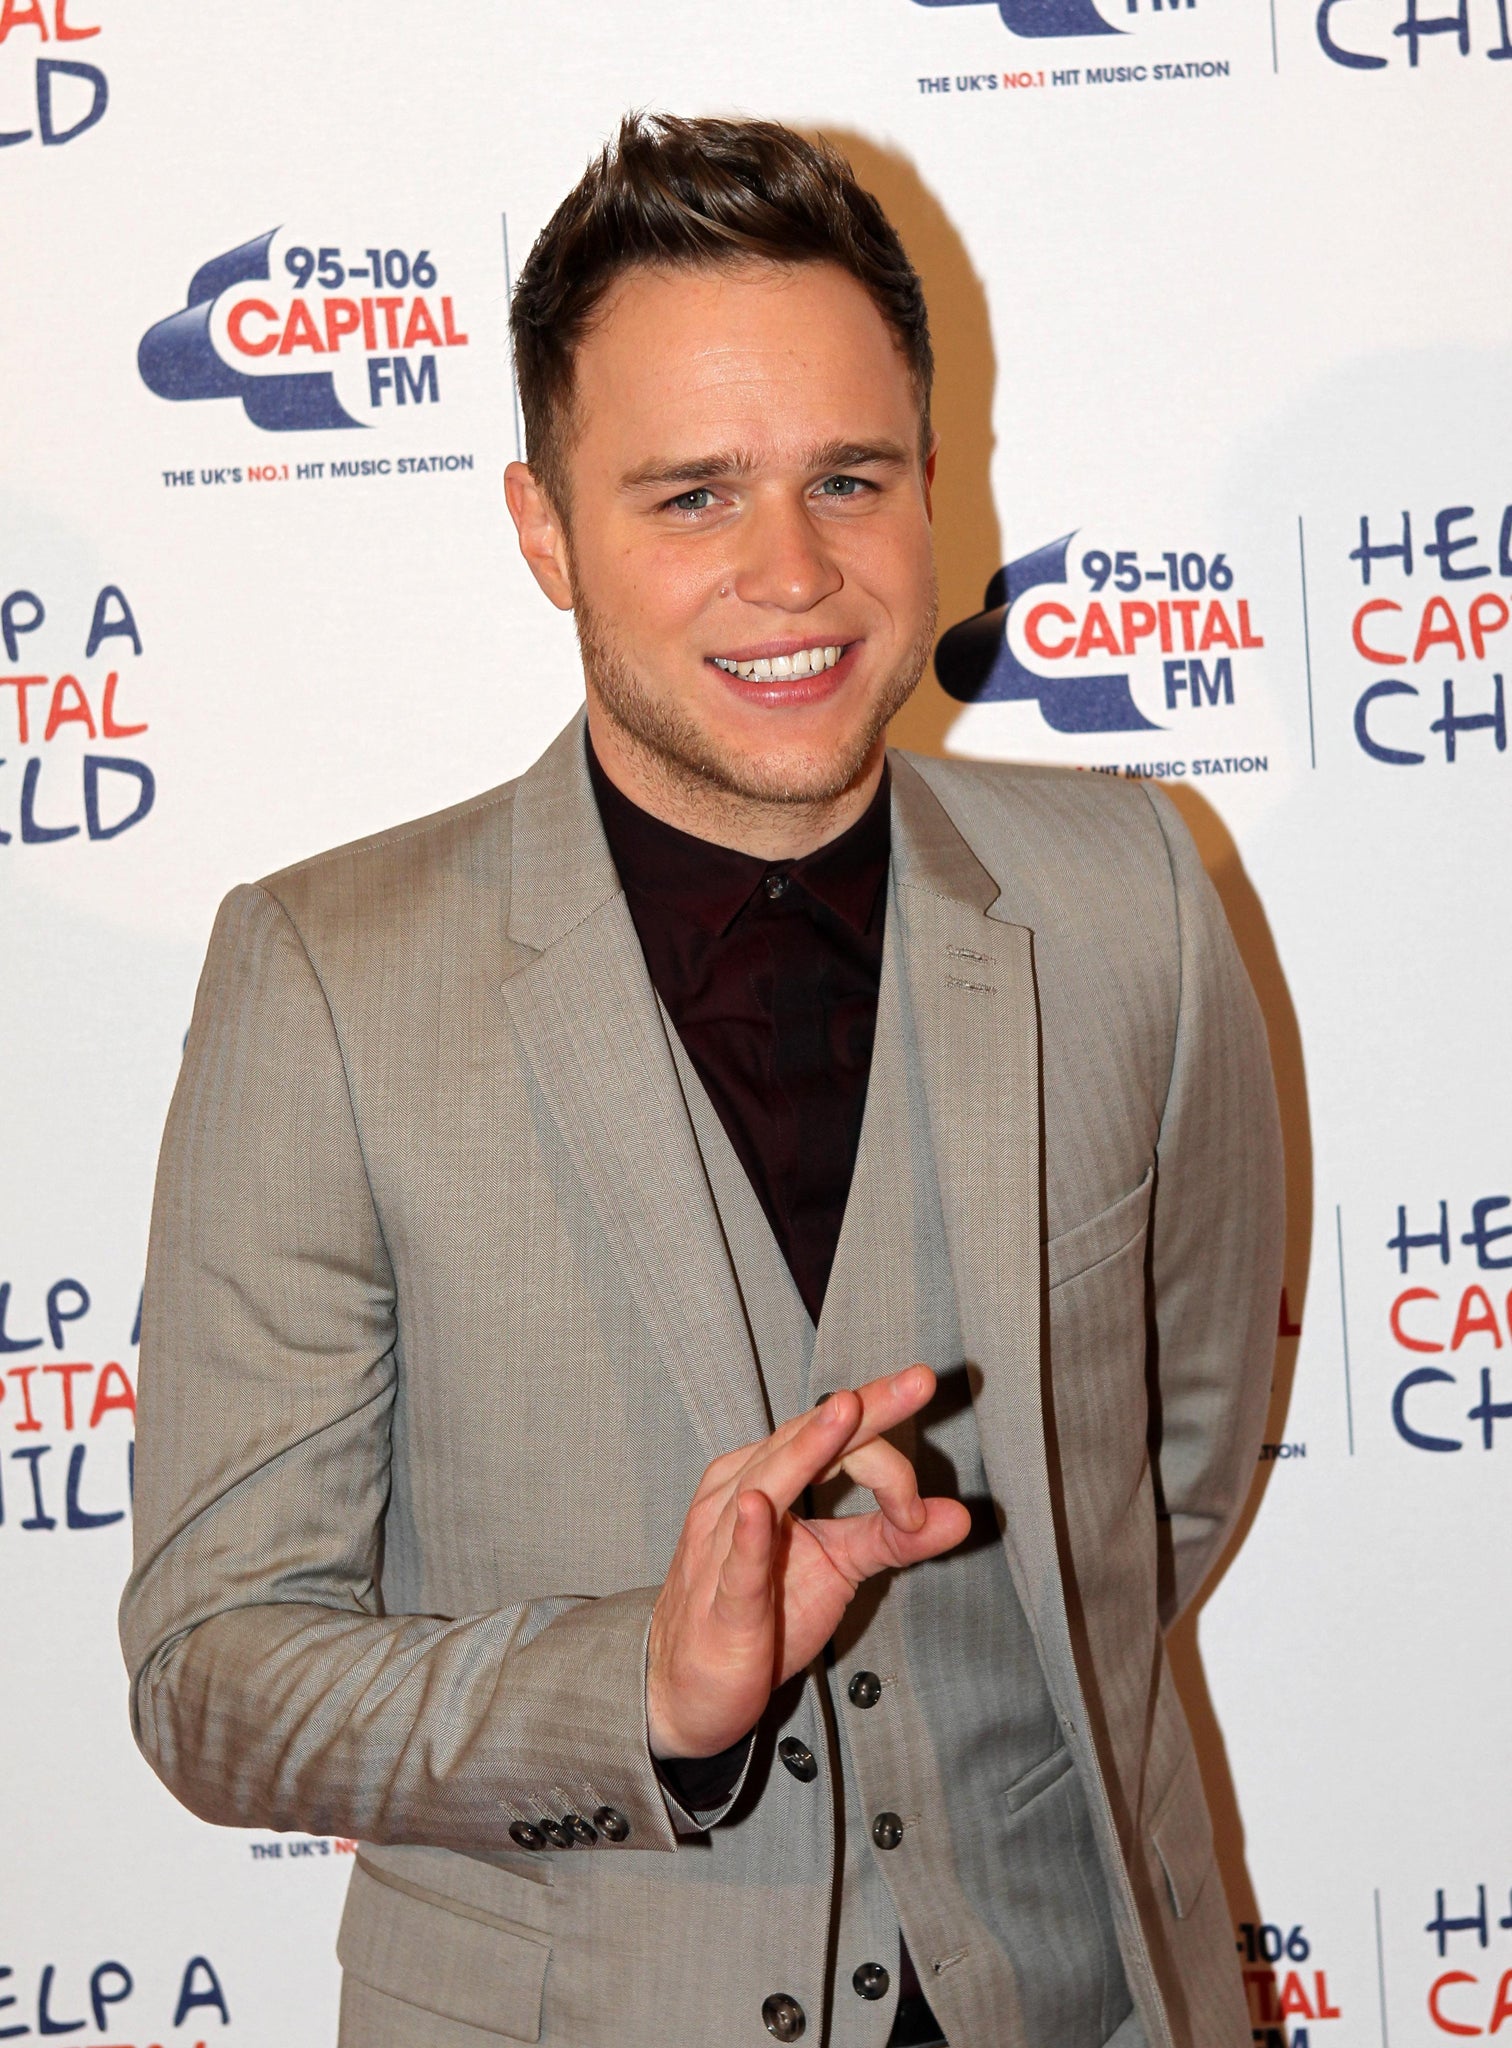 Olly Murs who is the king of the charts this week after reaching number one with an album and single.